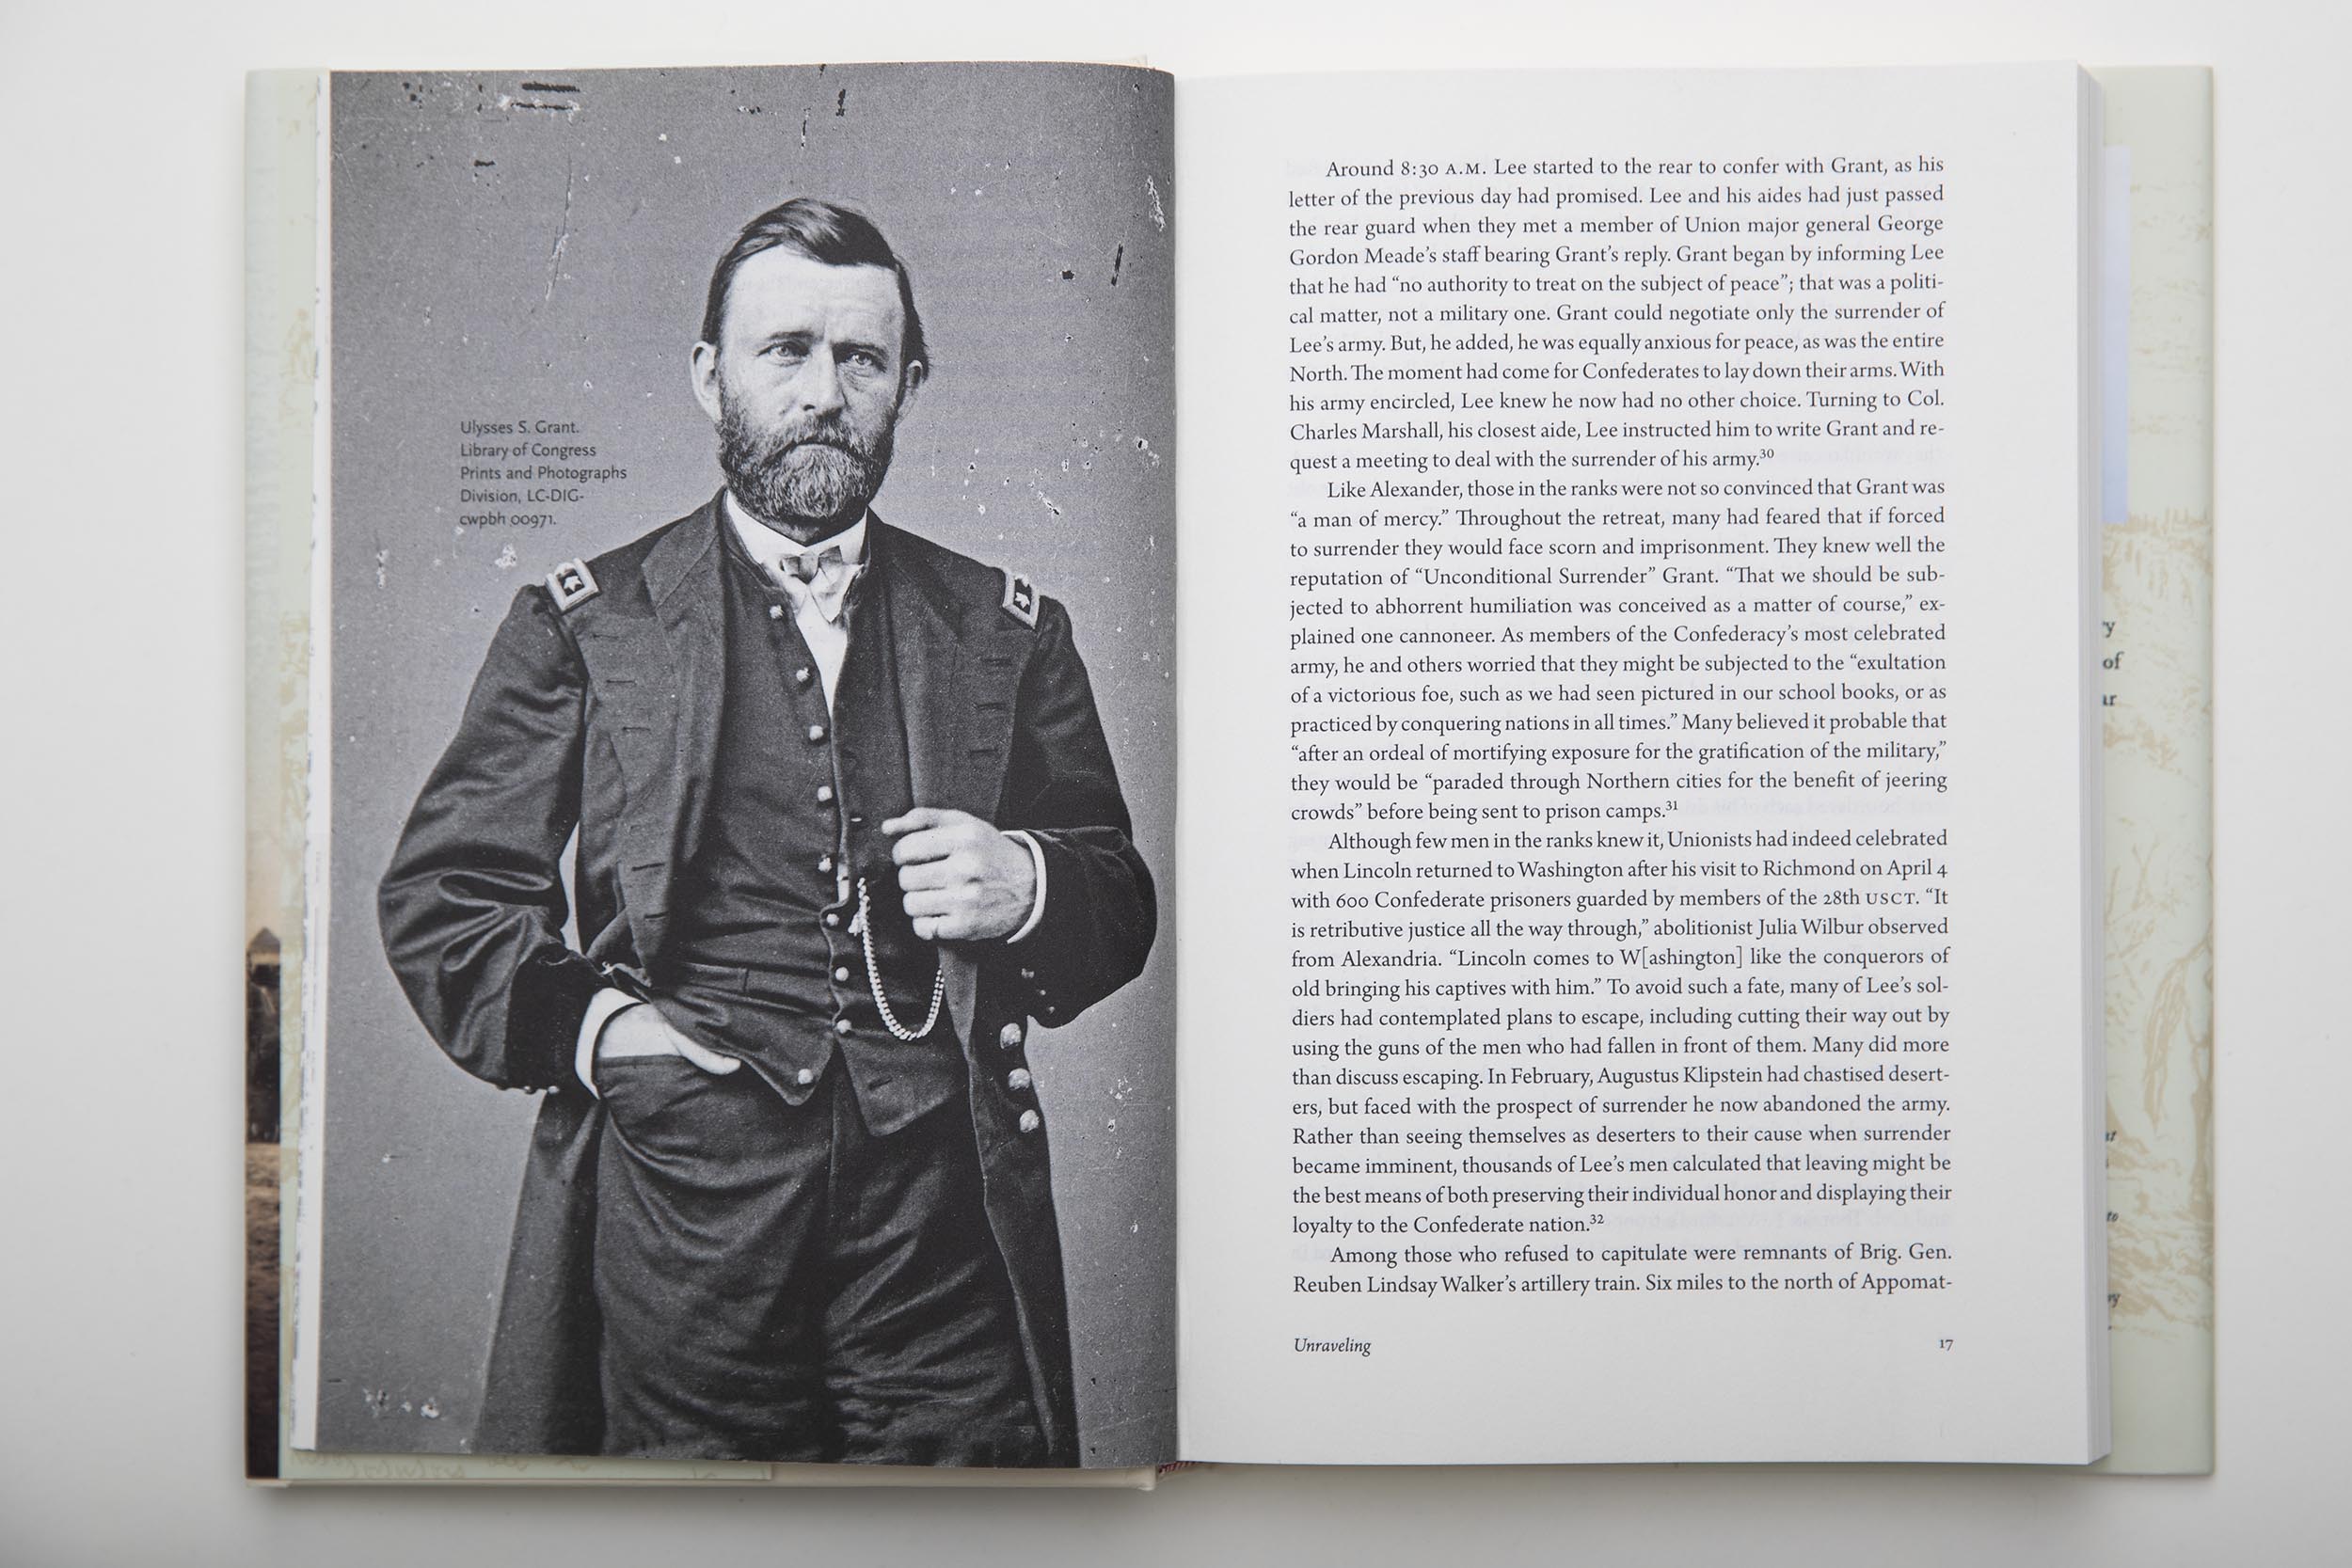 image in a book of General Ulysses S. Grant standing